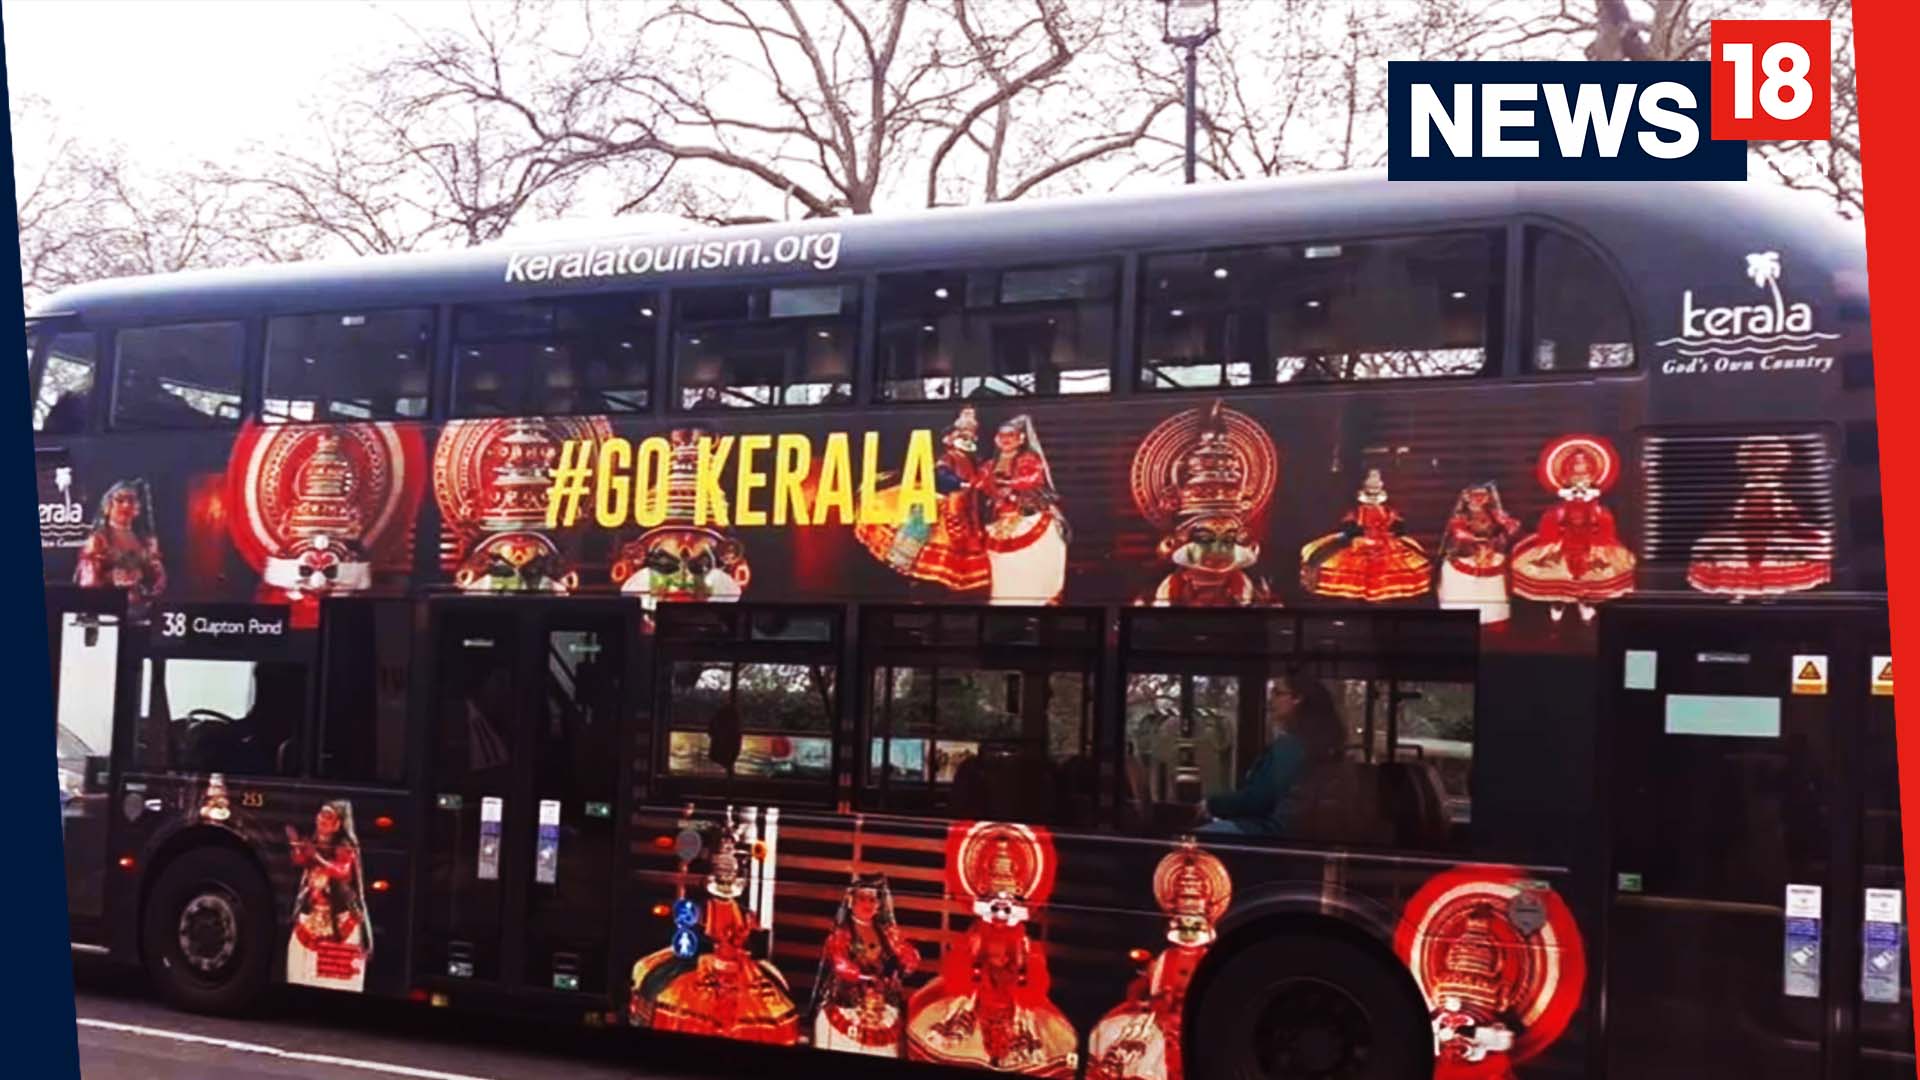 'God's Own Country' Advertised on London Buses